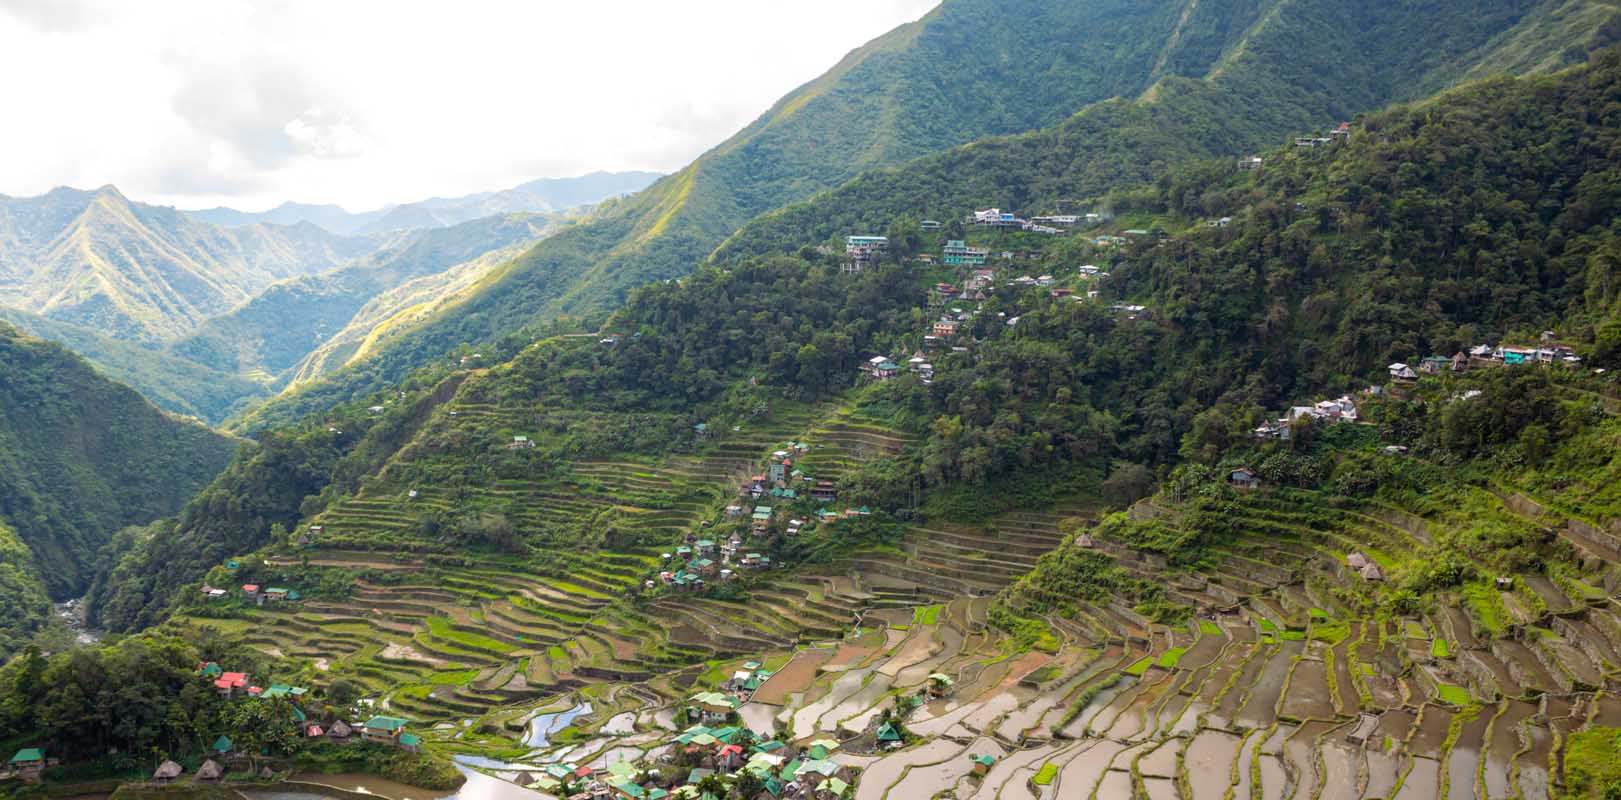 Cold places in the Philippines - Banaue